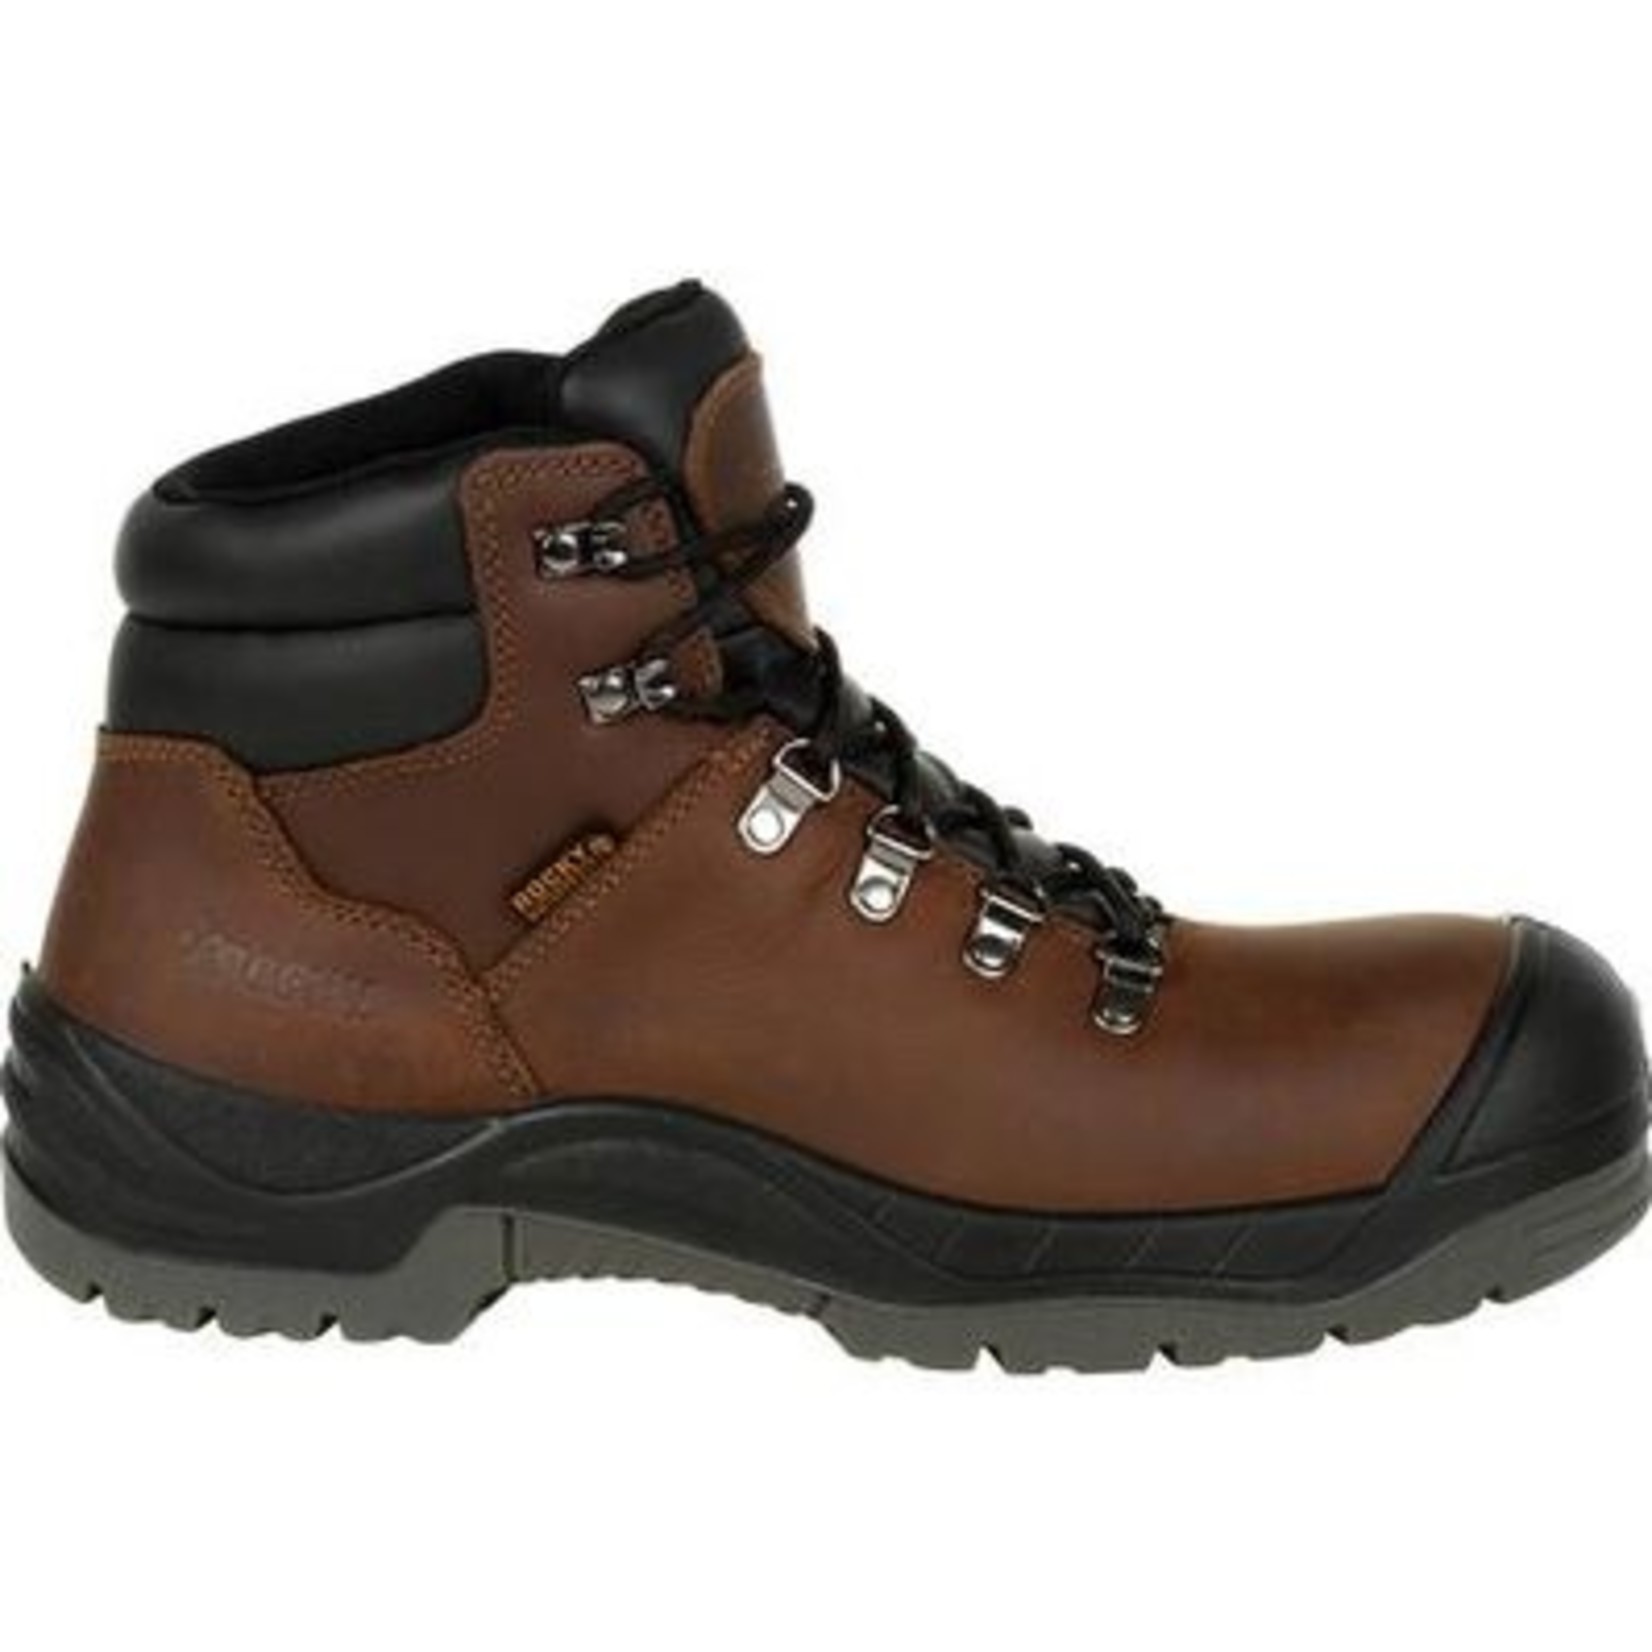 ROCKY BOOTS WORKSMART WP CT EH